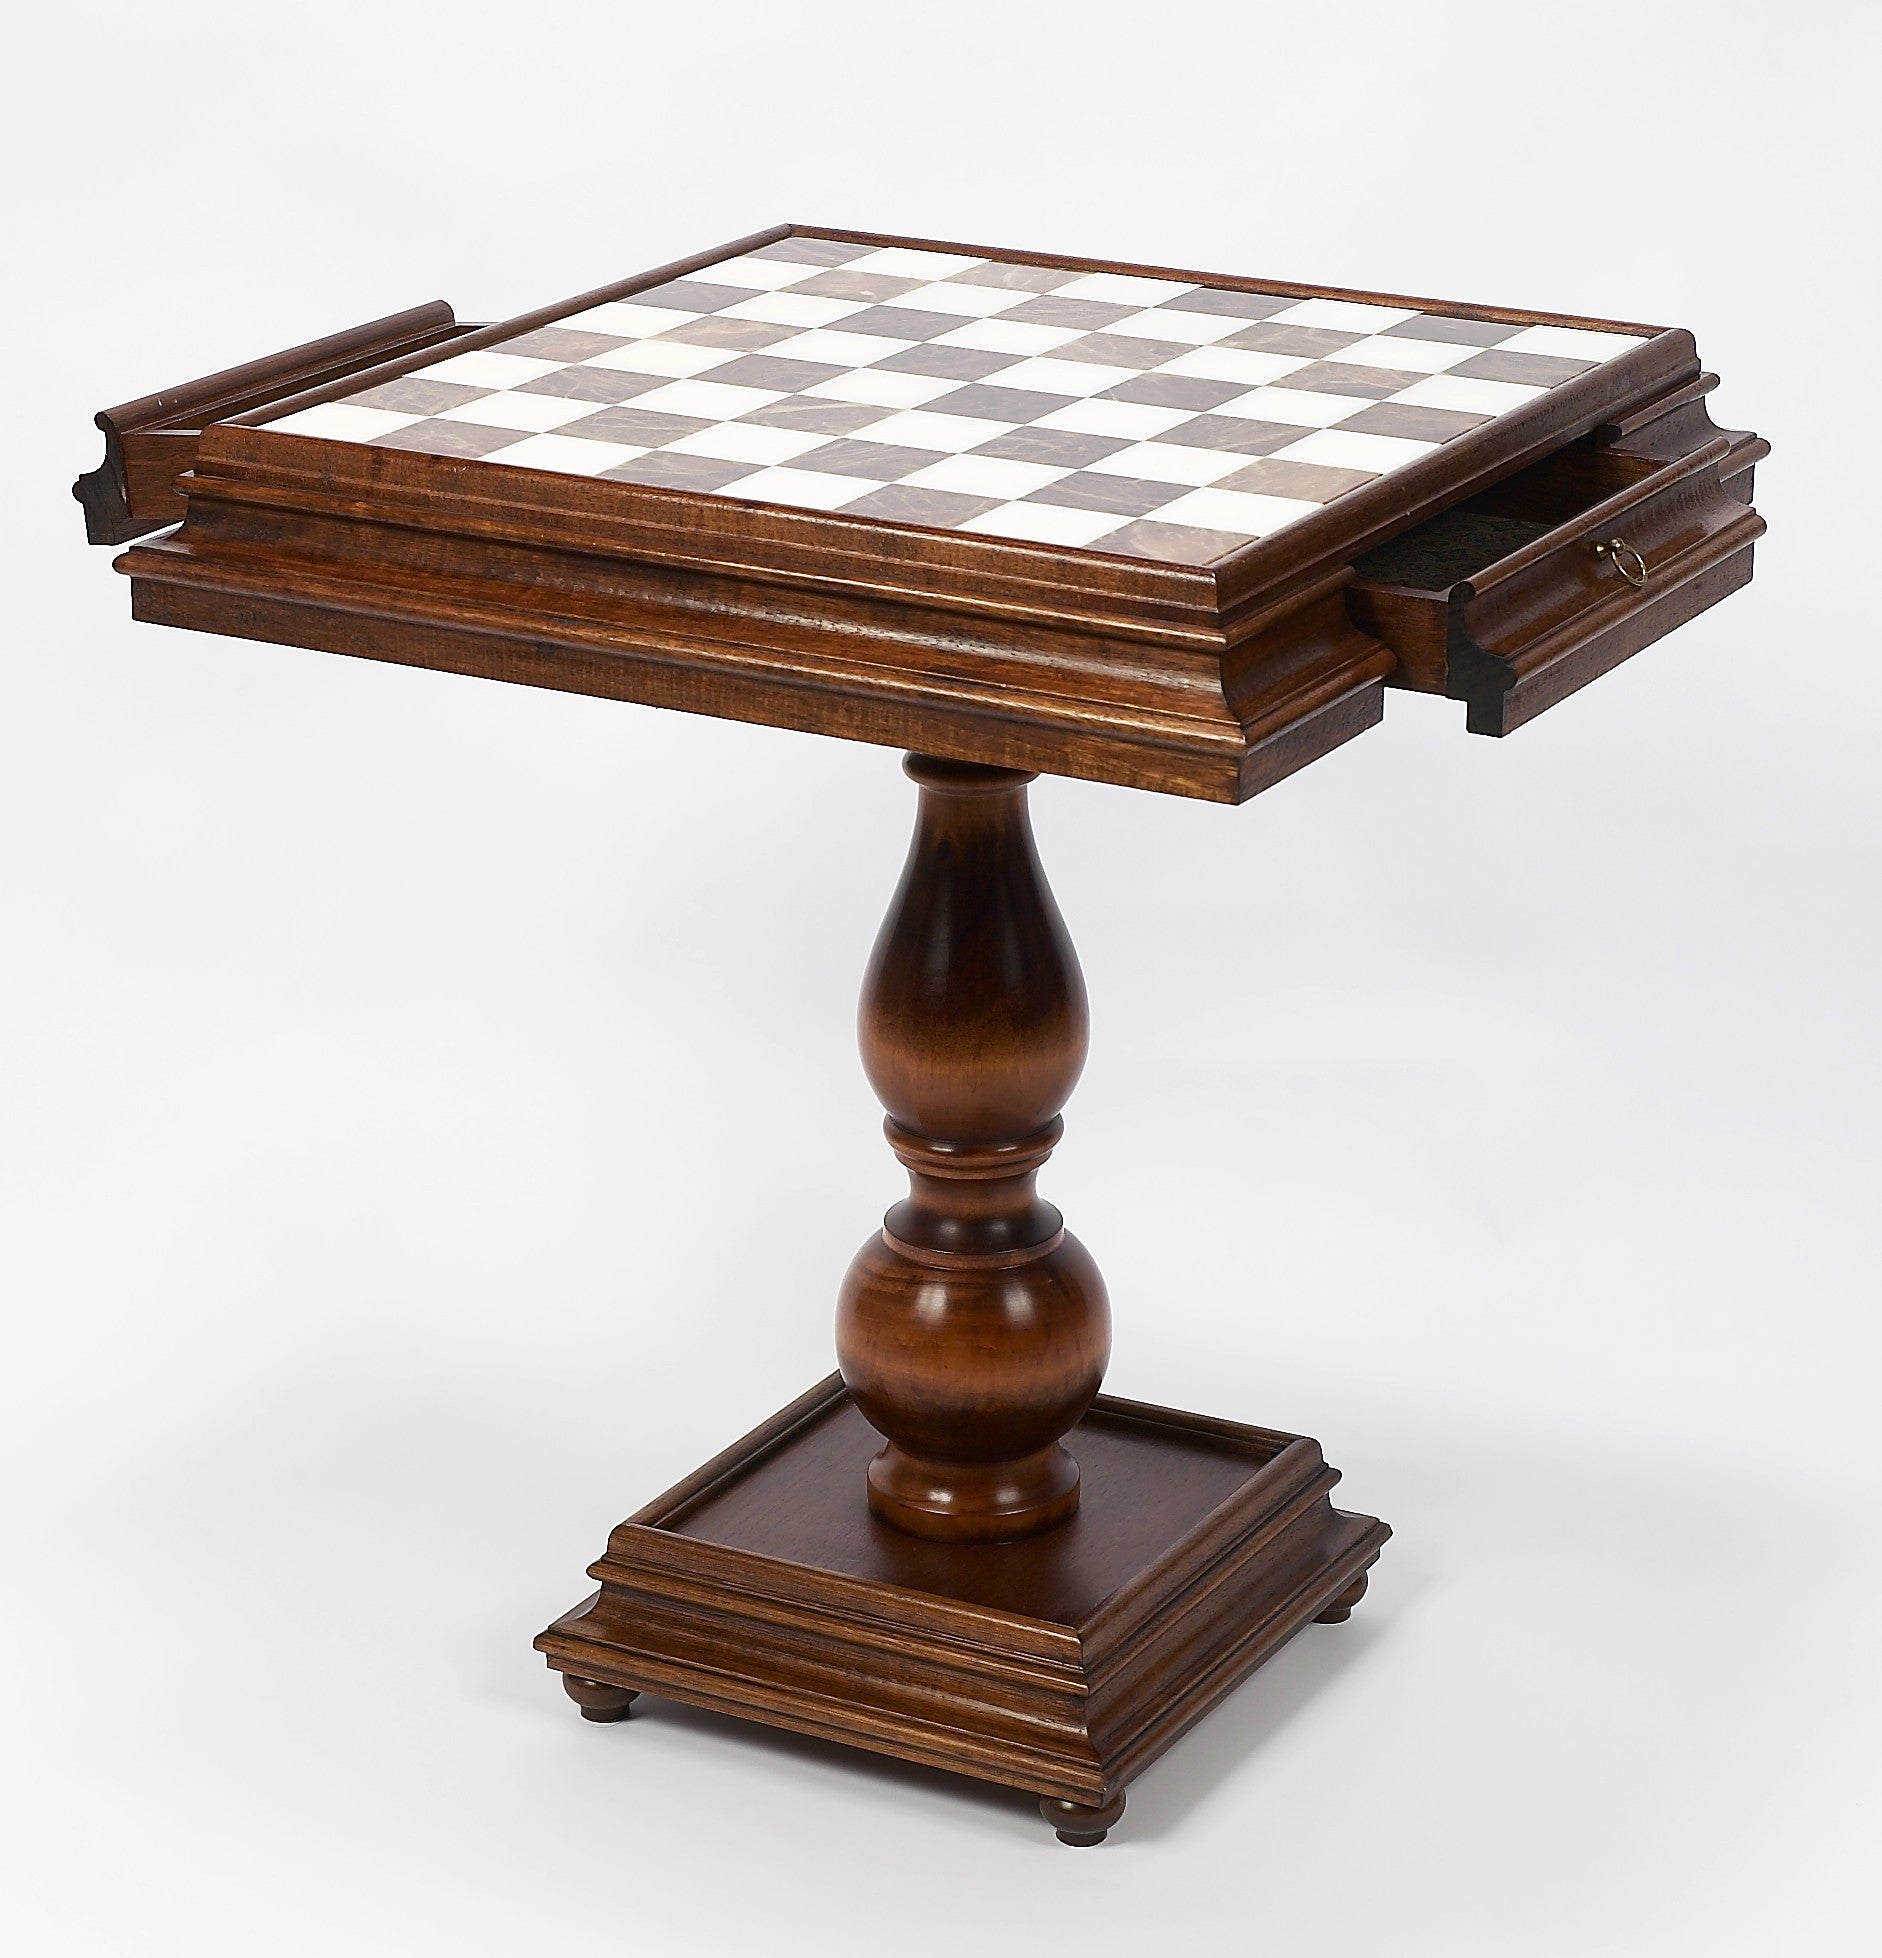 23.5 inch Marble/Wood Chess & Checkers Table from Italy